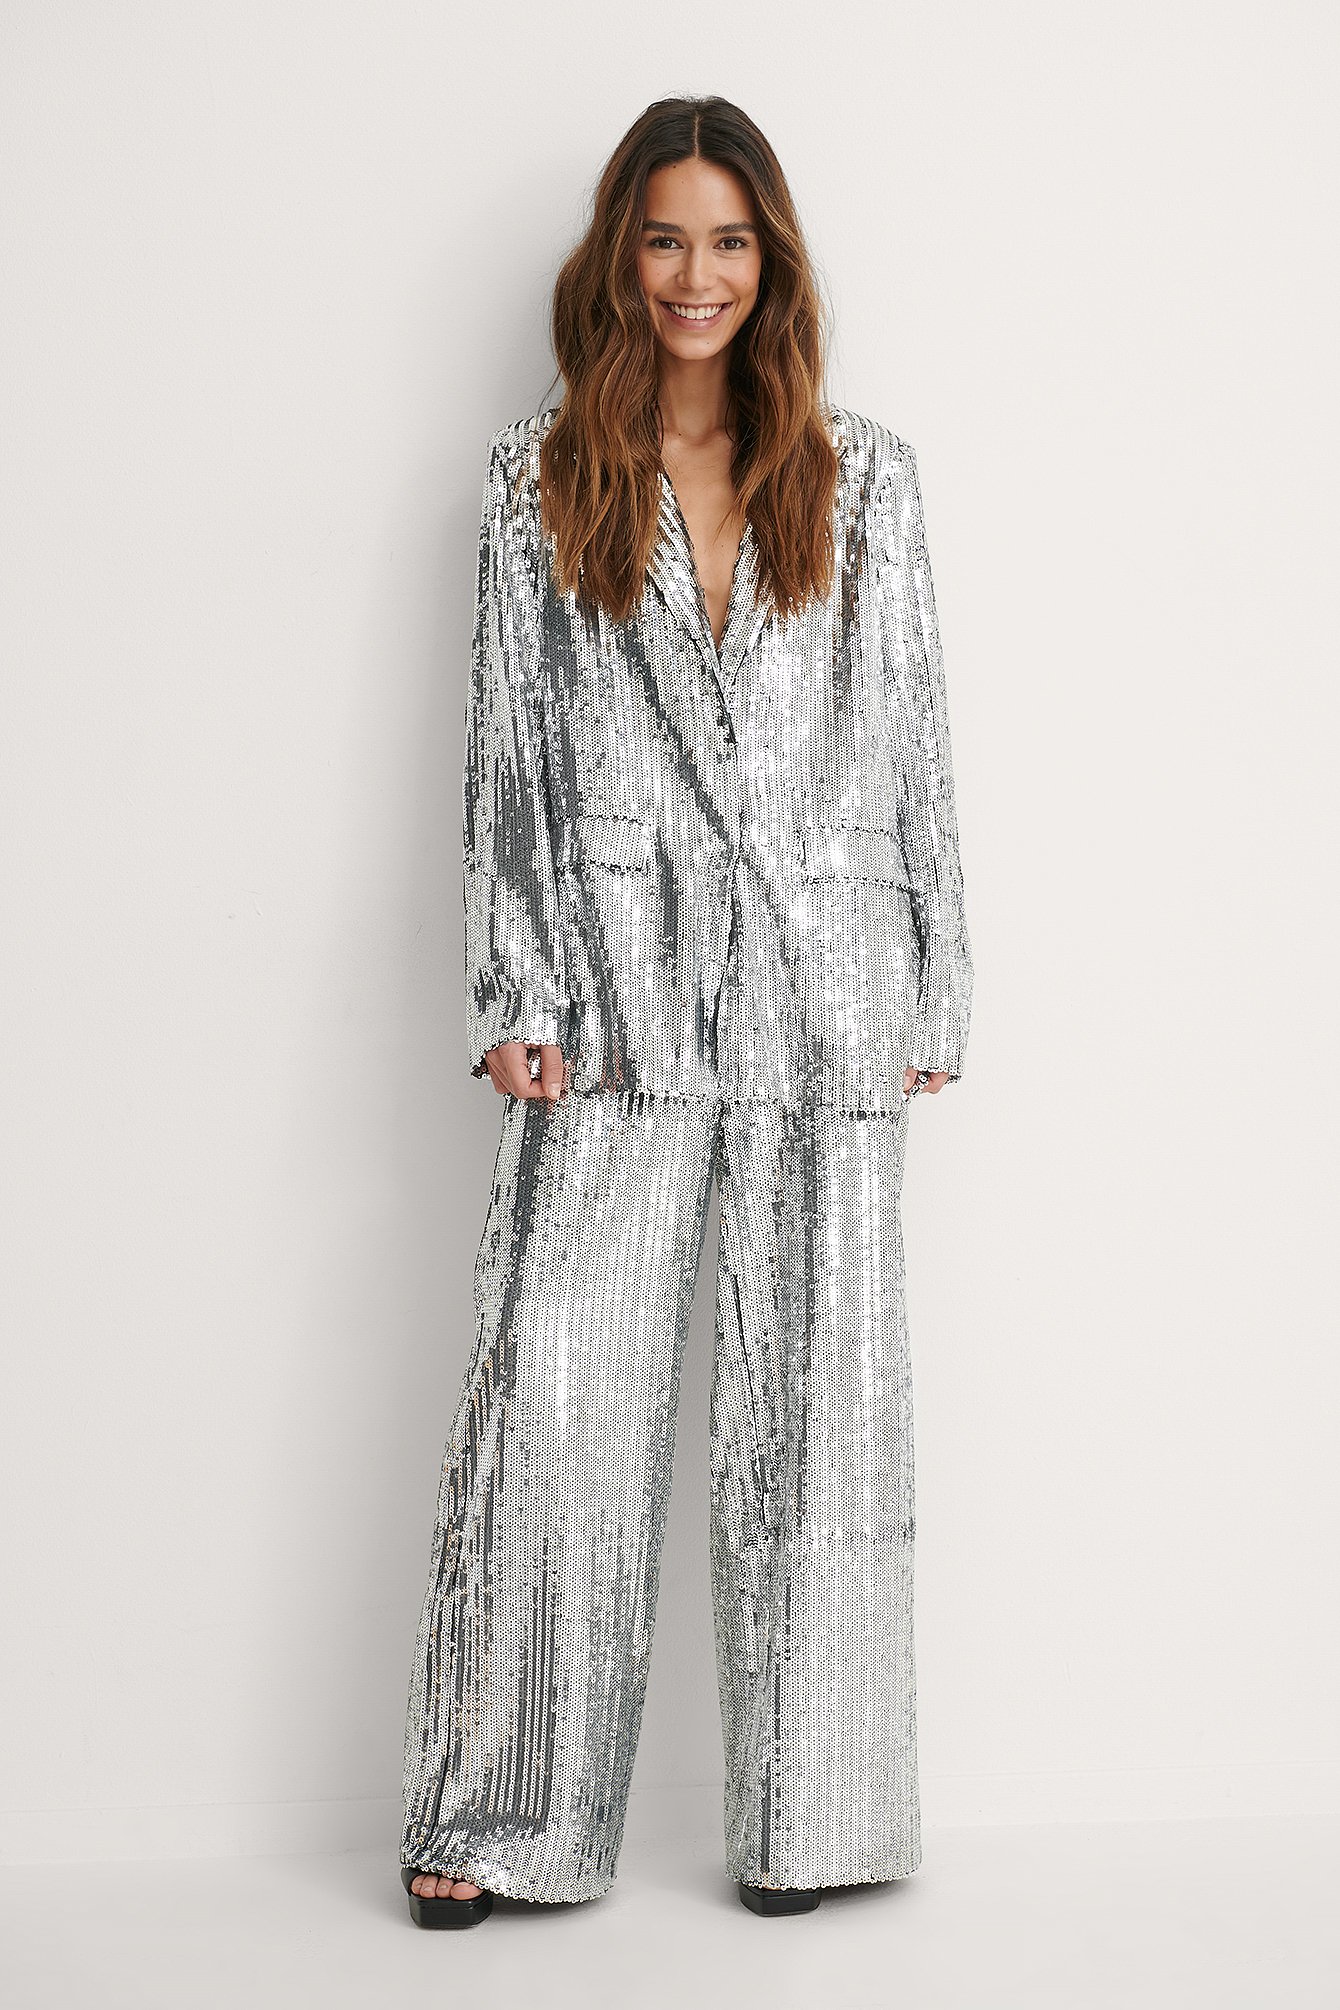 Glittery High Waist Sequin Flare Pants For Women Perfect For Fall/Winter  2023 Parties And Nightclubs Y2K Sweetpaant From Shizier, $23.79 | DHgate.Com